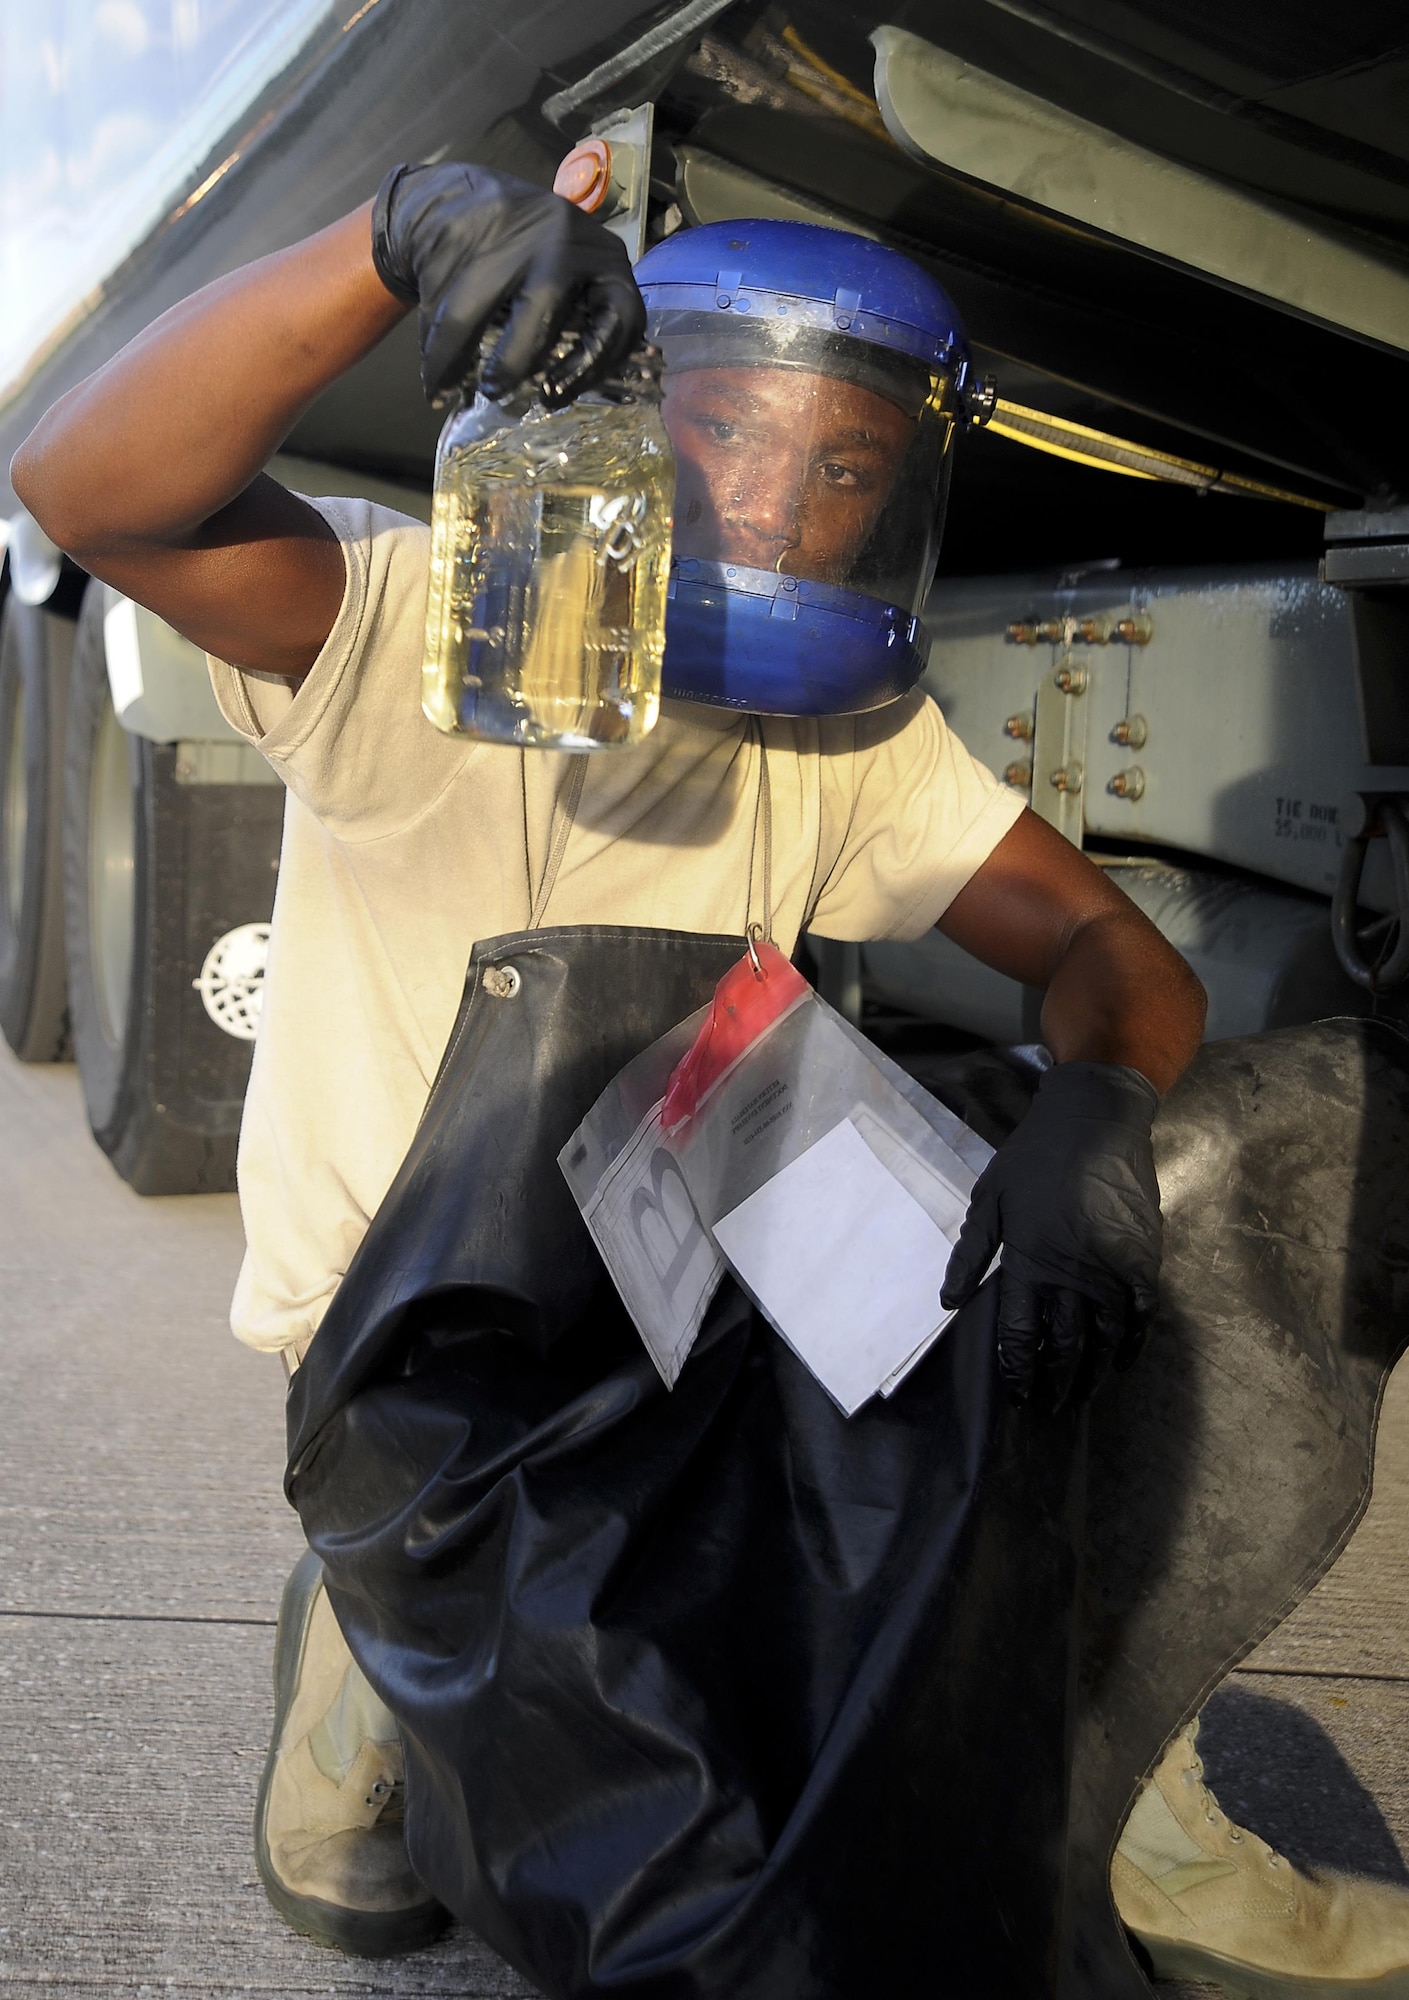 Airman Raymond Randall, a distribution truck operator with the 6th Logistics Readiness Squadron, performs a fuel test at MacDill Air Force Base, Fla., Sept. 21, 2016. Fuel testing is performed daily to ensure fuel quality is at its best. (U.S. Air Force photo by Airman 1st Class Mariette Adams)